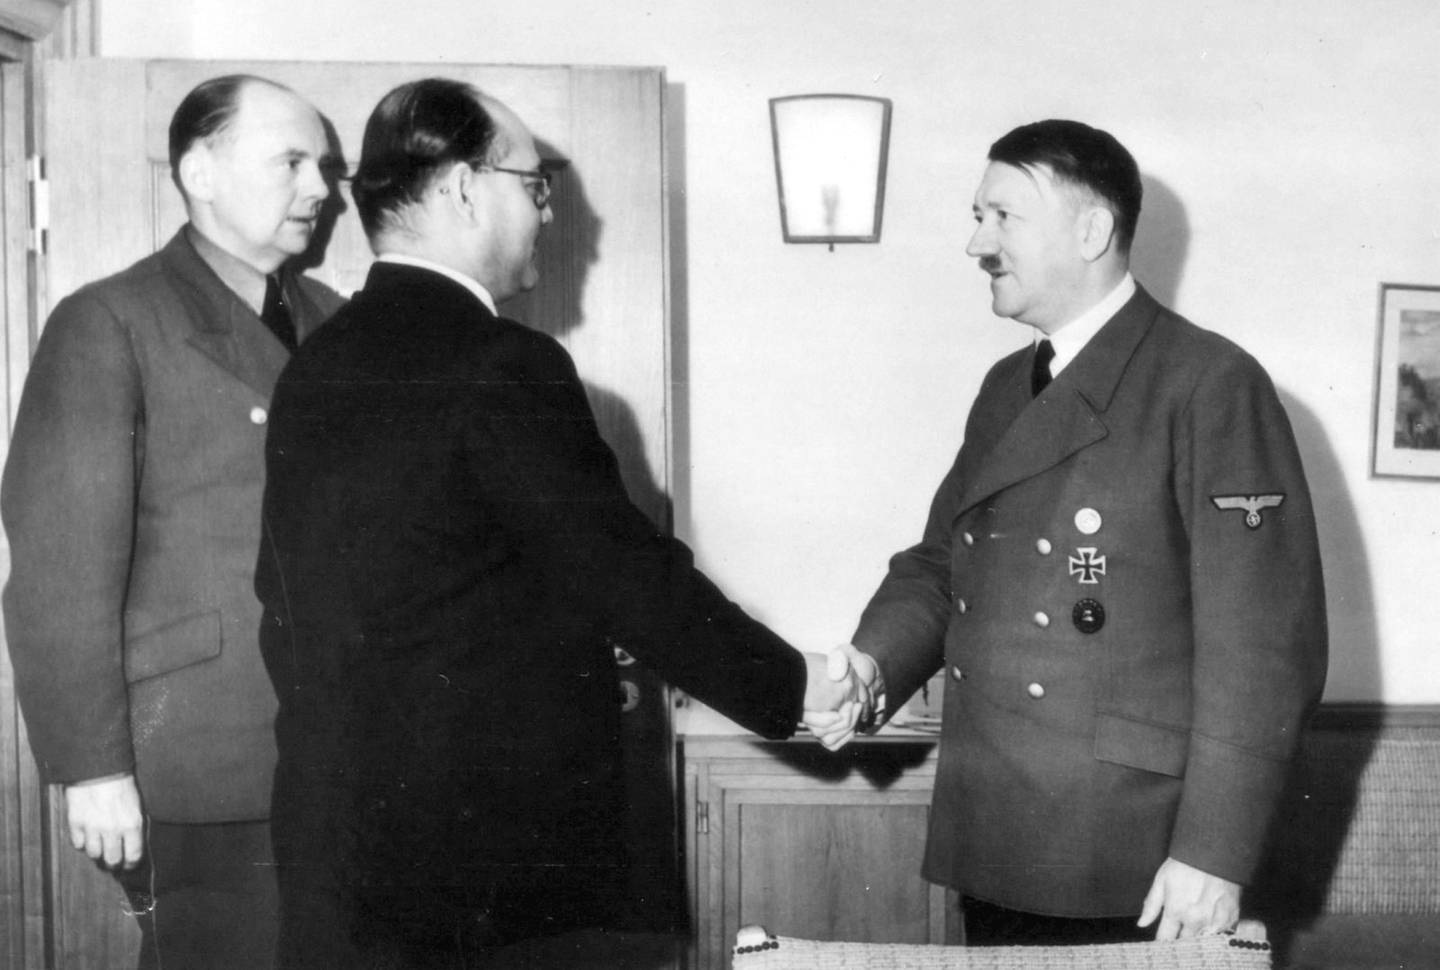 Indian nationalist leader Subhash Chandra Bose and Adolf Hitler, Berlin, Germany, May 1942. (Photo by: Universal History Archive/UIG via Getty Images)